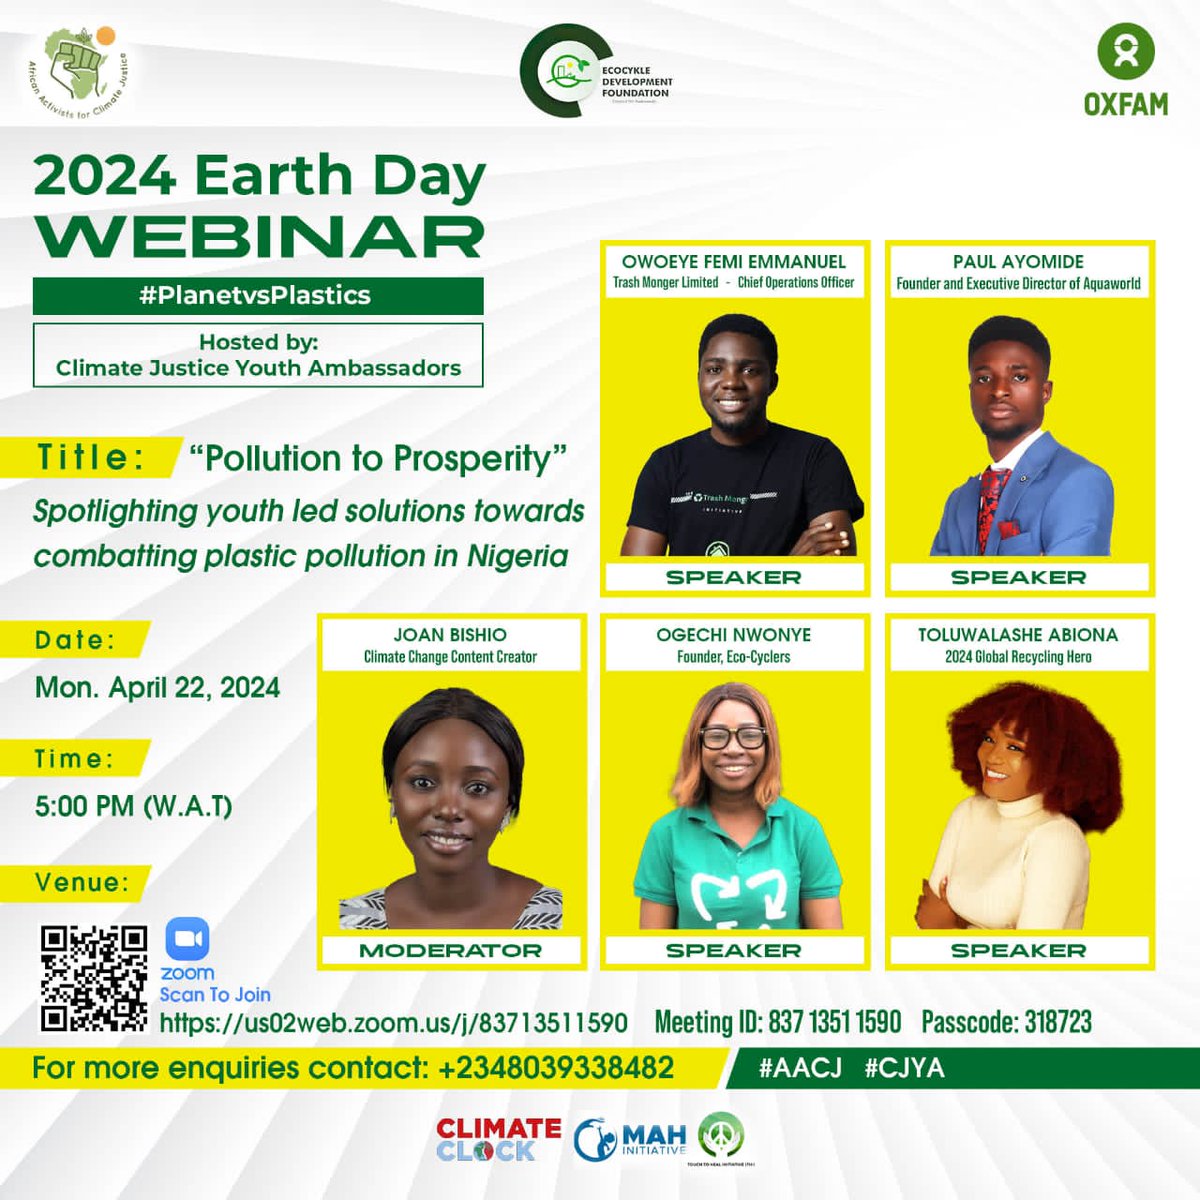 Climate Justice Youth Ambassadors (CJYA) in collaboration with OXFAM and AACJ invites you to its inaugural webinar in commemoration of the Earth Day 2024.
Title: From Pollution to Prosperity

Date: 22nd April 2024
Time: 5:00 PM (W.A.T)
Link: forms.gle/4x9fG2mt1jx5my…